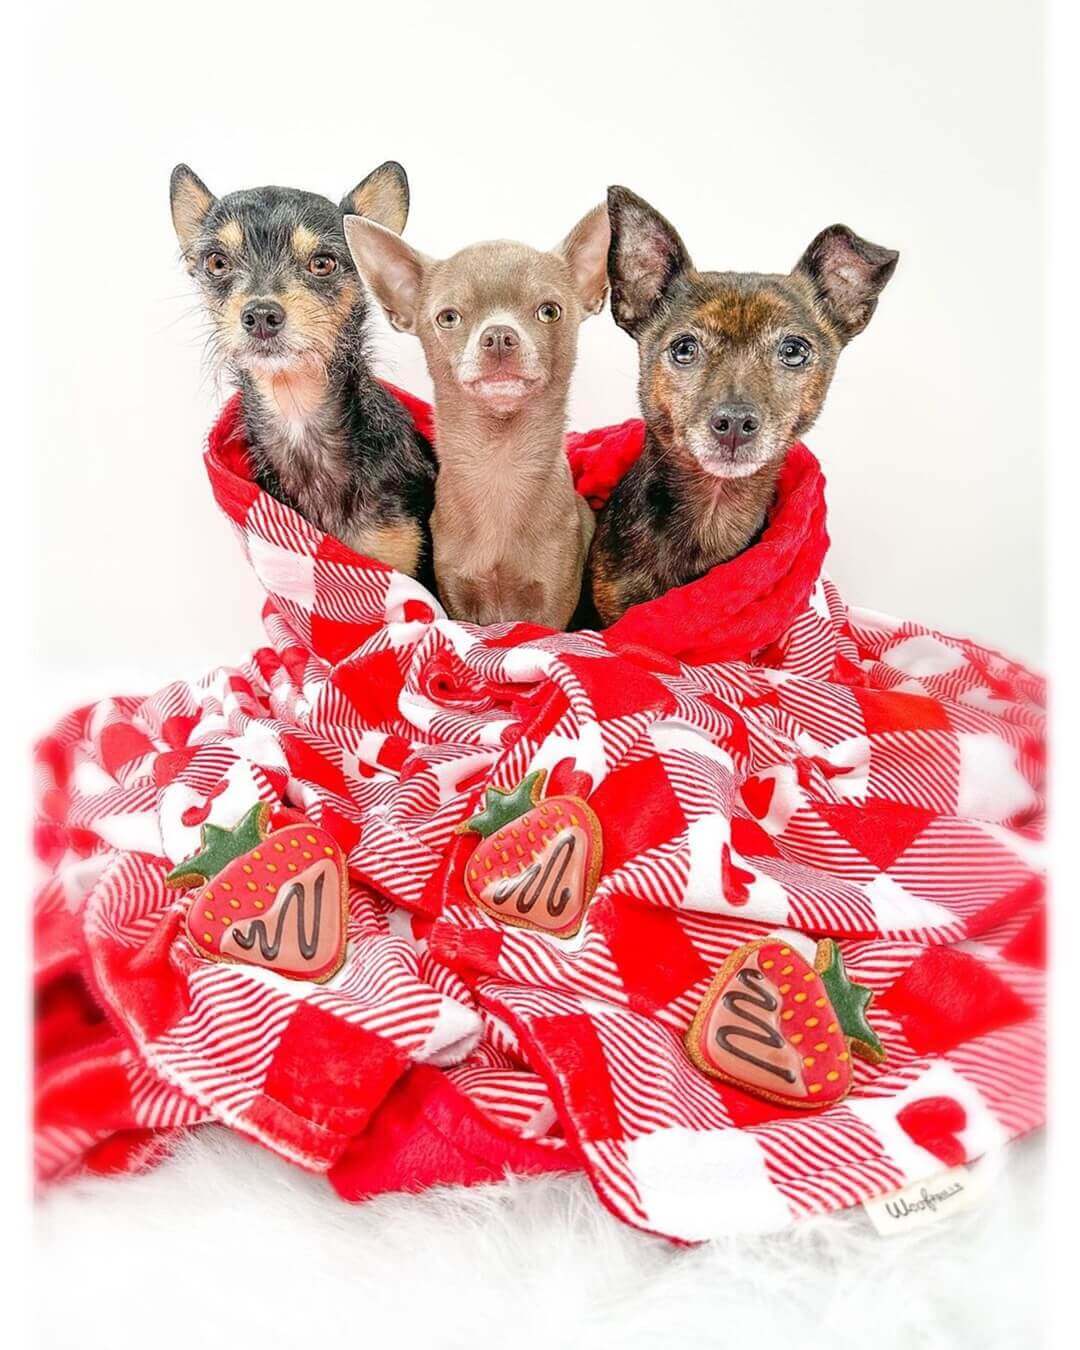 large dog blanket from WoofFrills with red and white hearts design